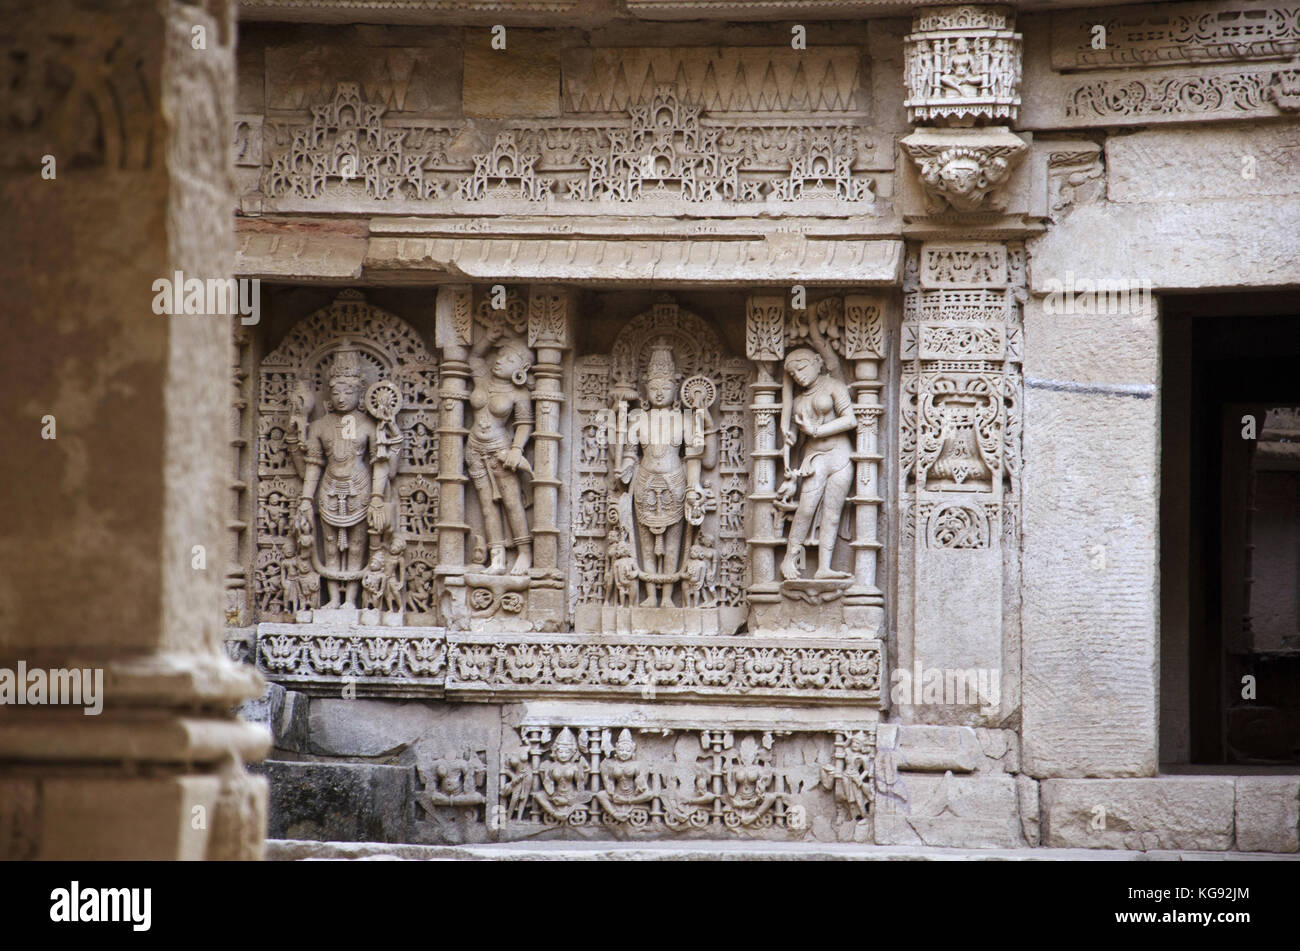 Carved idols on the inner wall and pillars of Rani ki vav, an intricately constructed stepwell on the banks of Saraswati River.  Patan, Gujarat, India Stock Photo